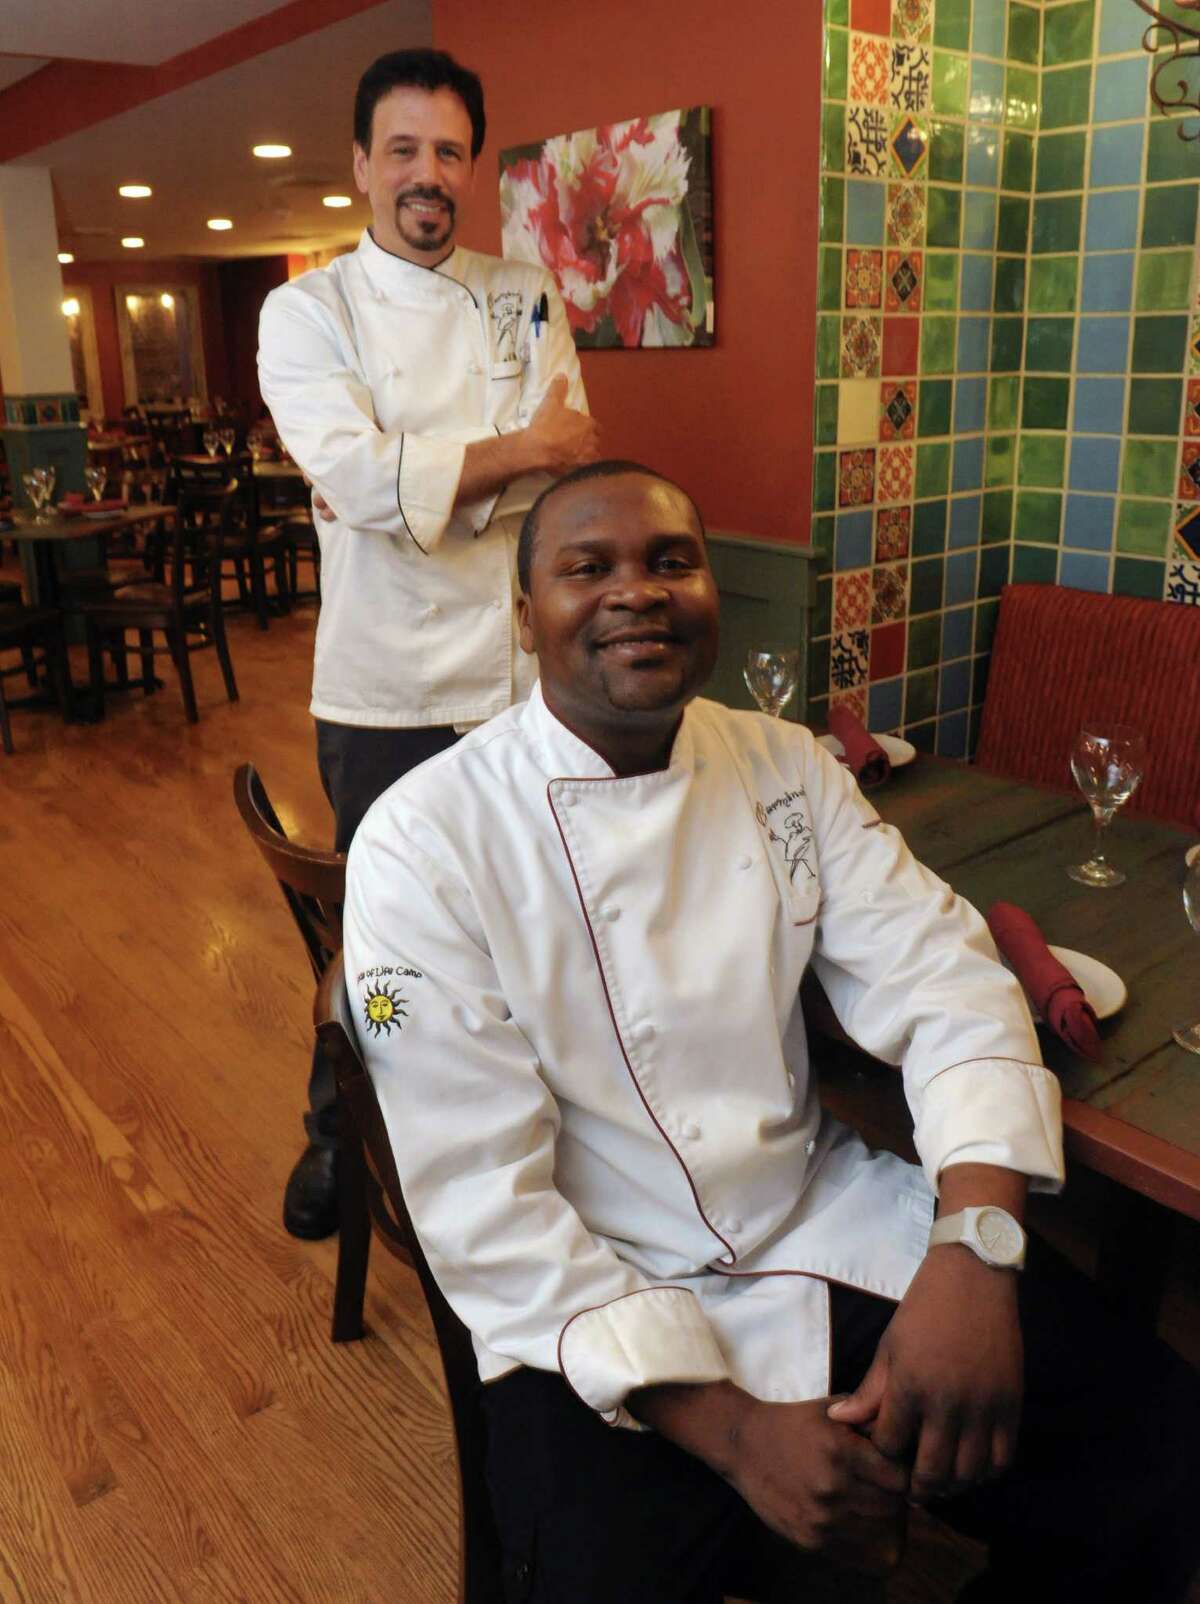 Owner/chef Carmine Sprio and chef Loubert Legros at Carmine's Restaurant at 4 Sheridan Ave on Tuesday May 21, 2013 in Albany, N.Y. (Michael P. Farrell/Times Union)